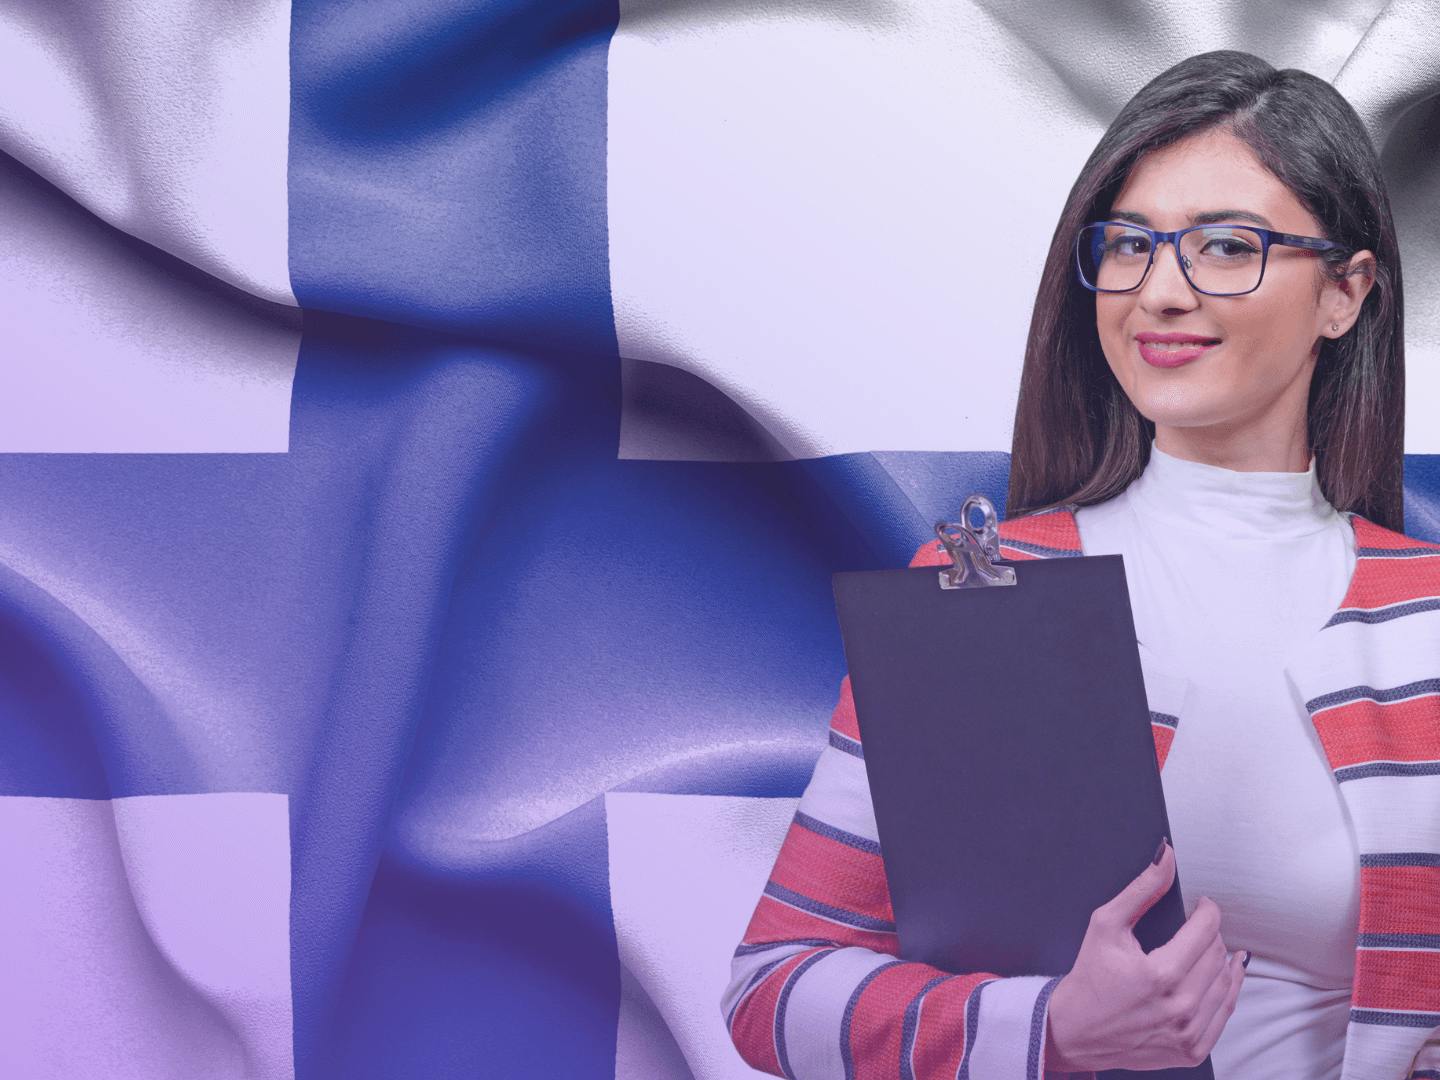 A confident woman wearing eyeglasses stands in front of the Finnish flag, working as a translator.